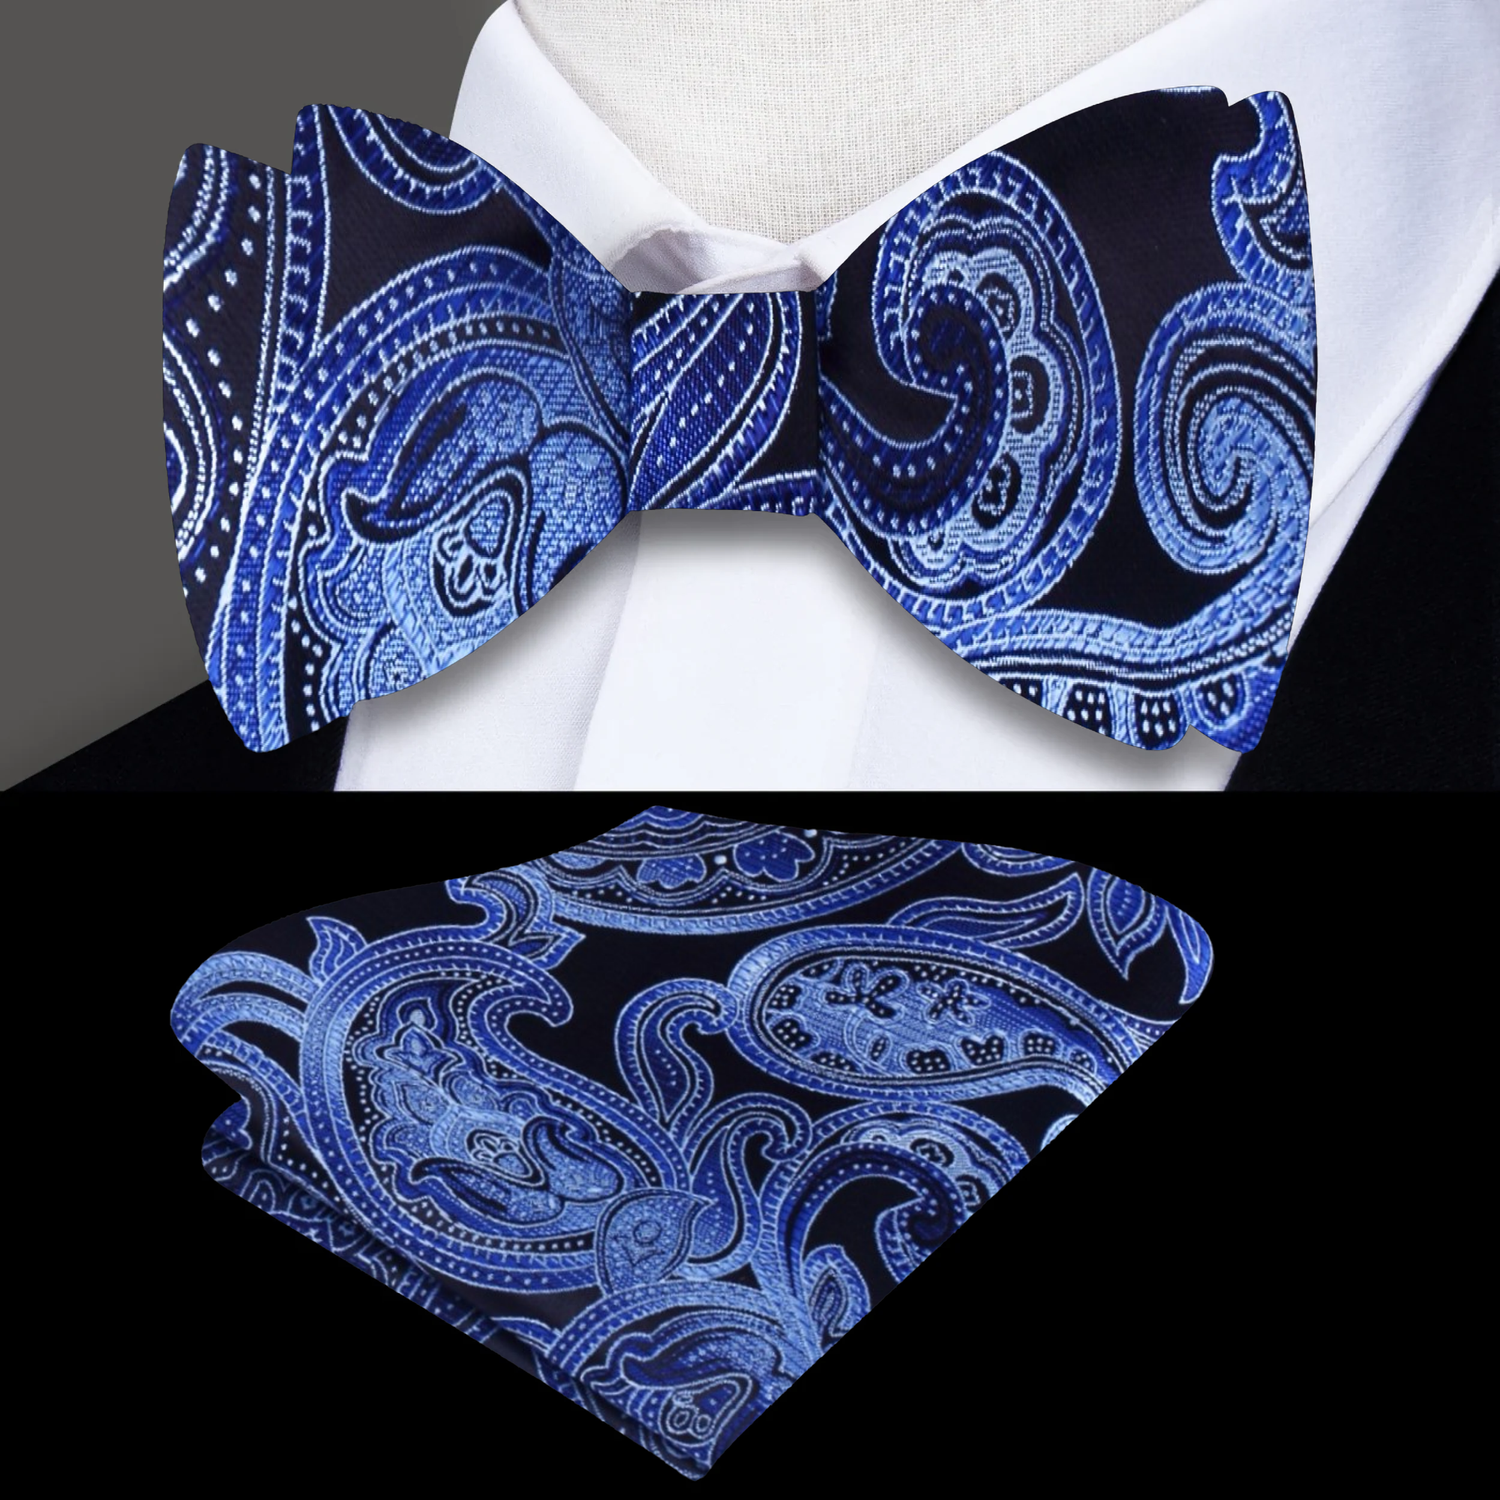 A Black, Blue Intricate Paisley Pattern Pre Tied Bow Tie and Square